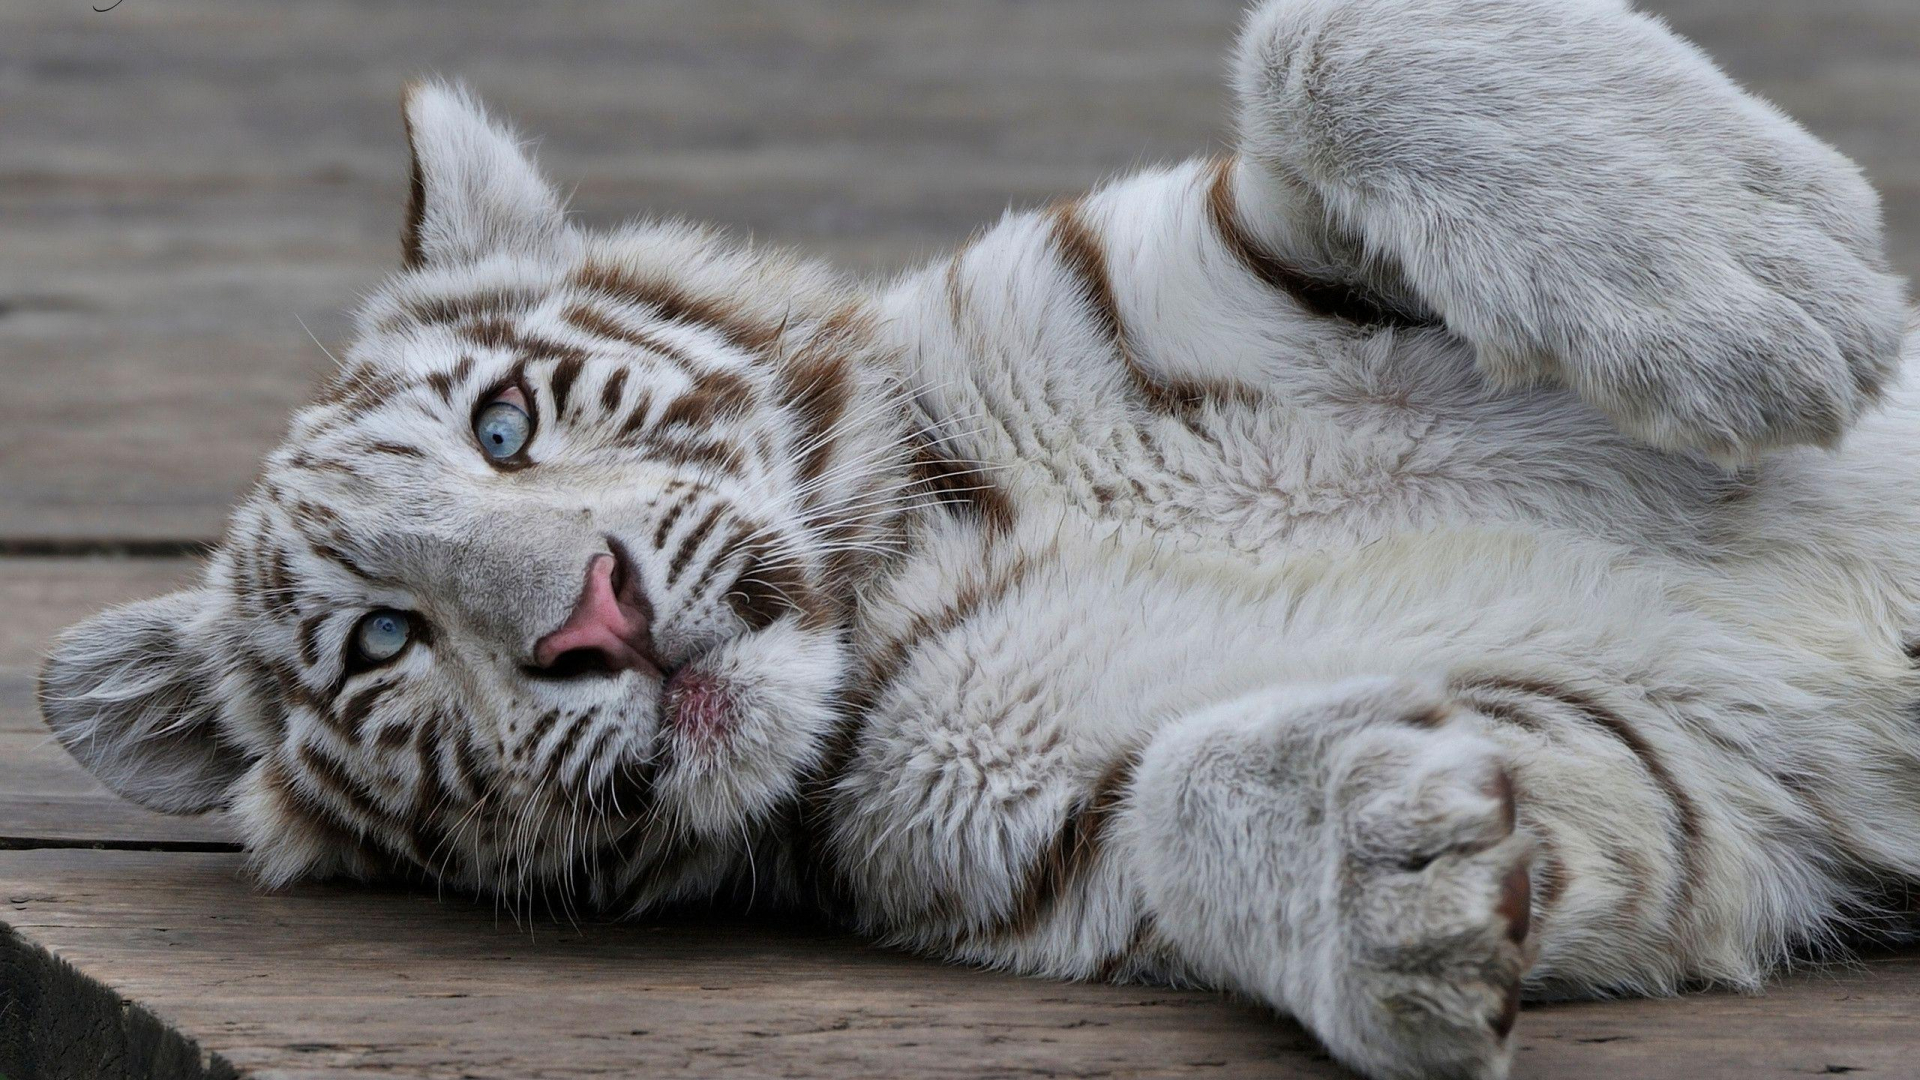 1920x1080 Free download White Tiger Cubs Wallpapers [2560x1600] for your Desktop, Mobile \u0026 Tablet | Explore 71+ White Tiger Cubs Wallpaper | Tiger Wallpaper HD, Cubs Win Wallpaper, Tigers Wallpapers for Desktop